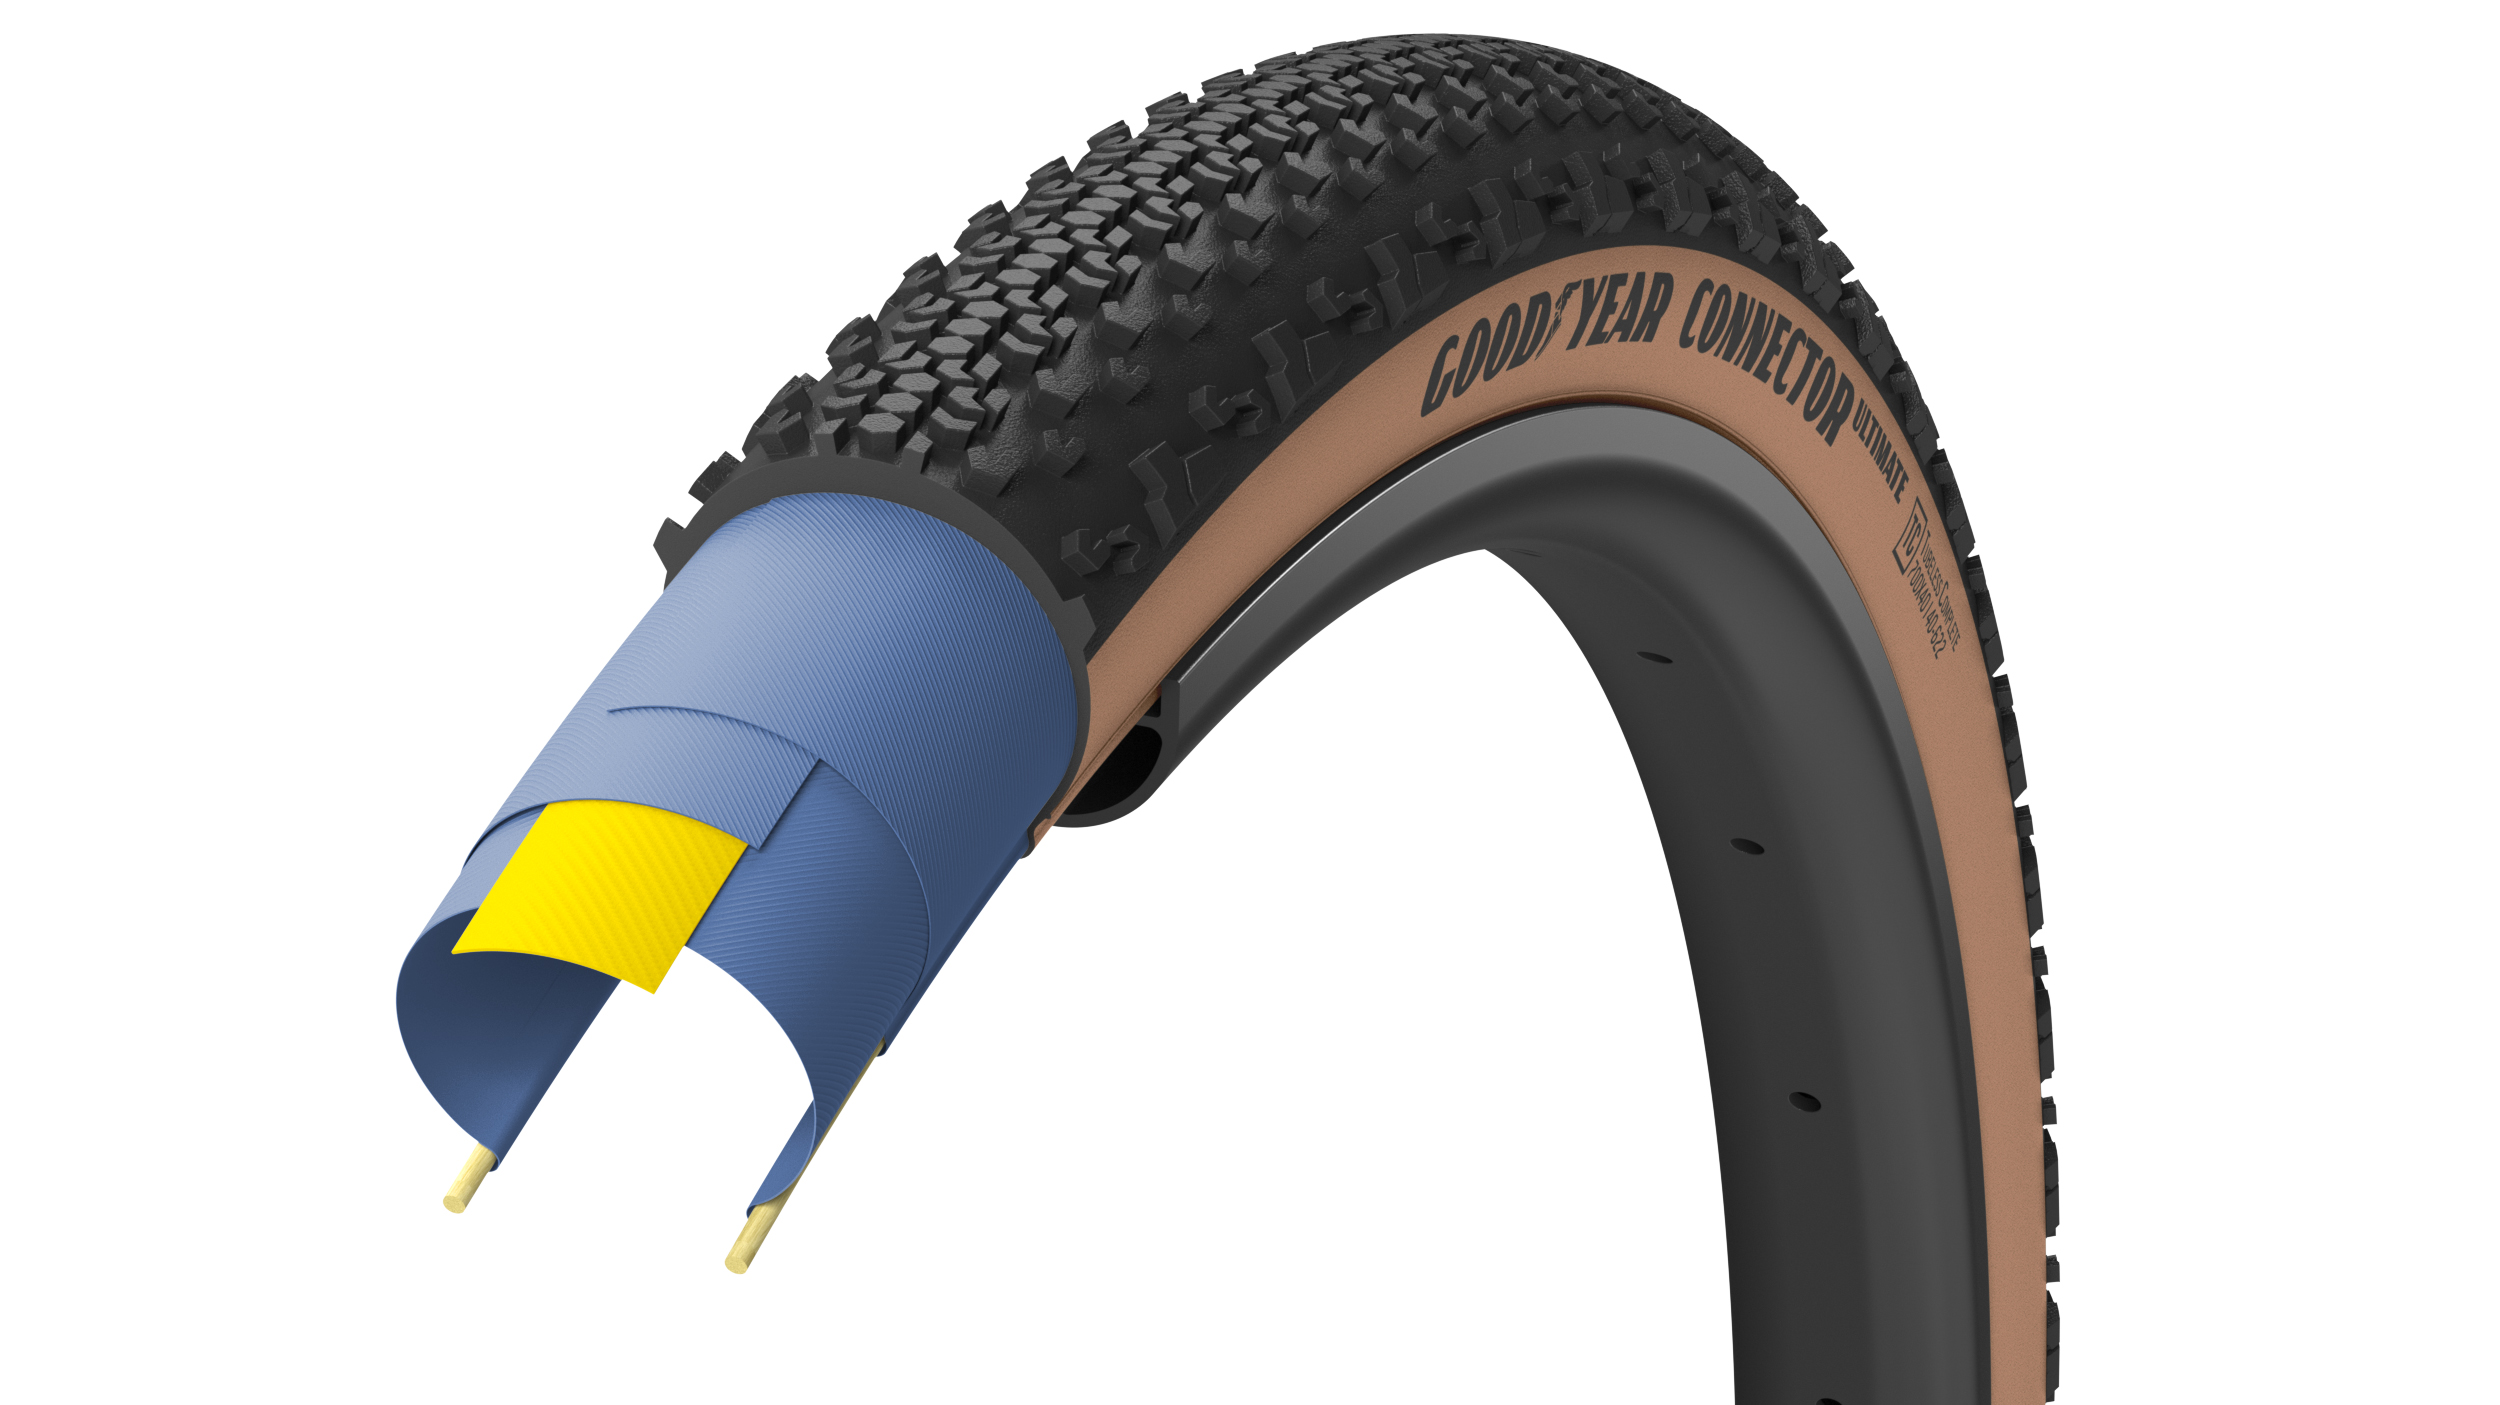 Покрышка 700x40 (40-622) GoodYear CONNECTOR tubeless complete, folding, black/tan, 120tpi